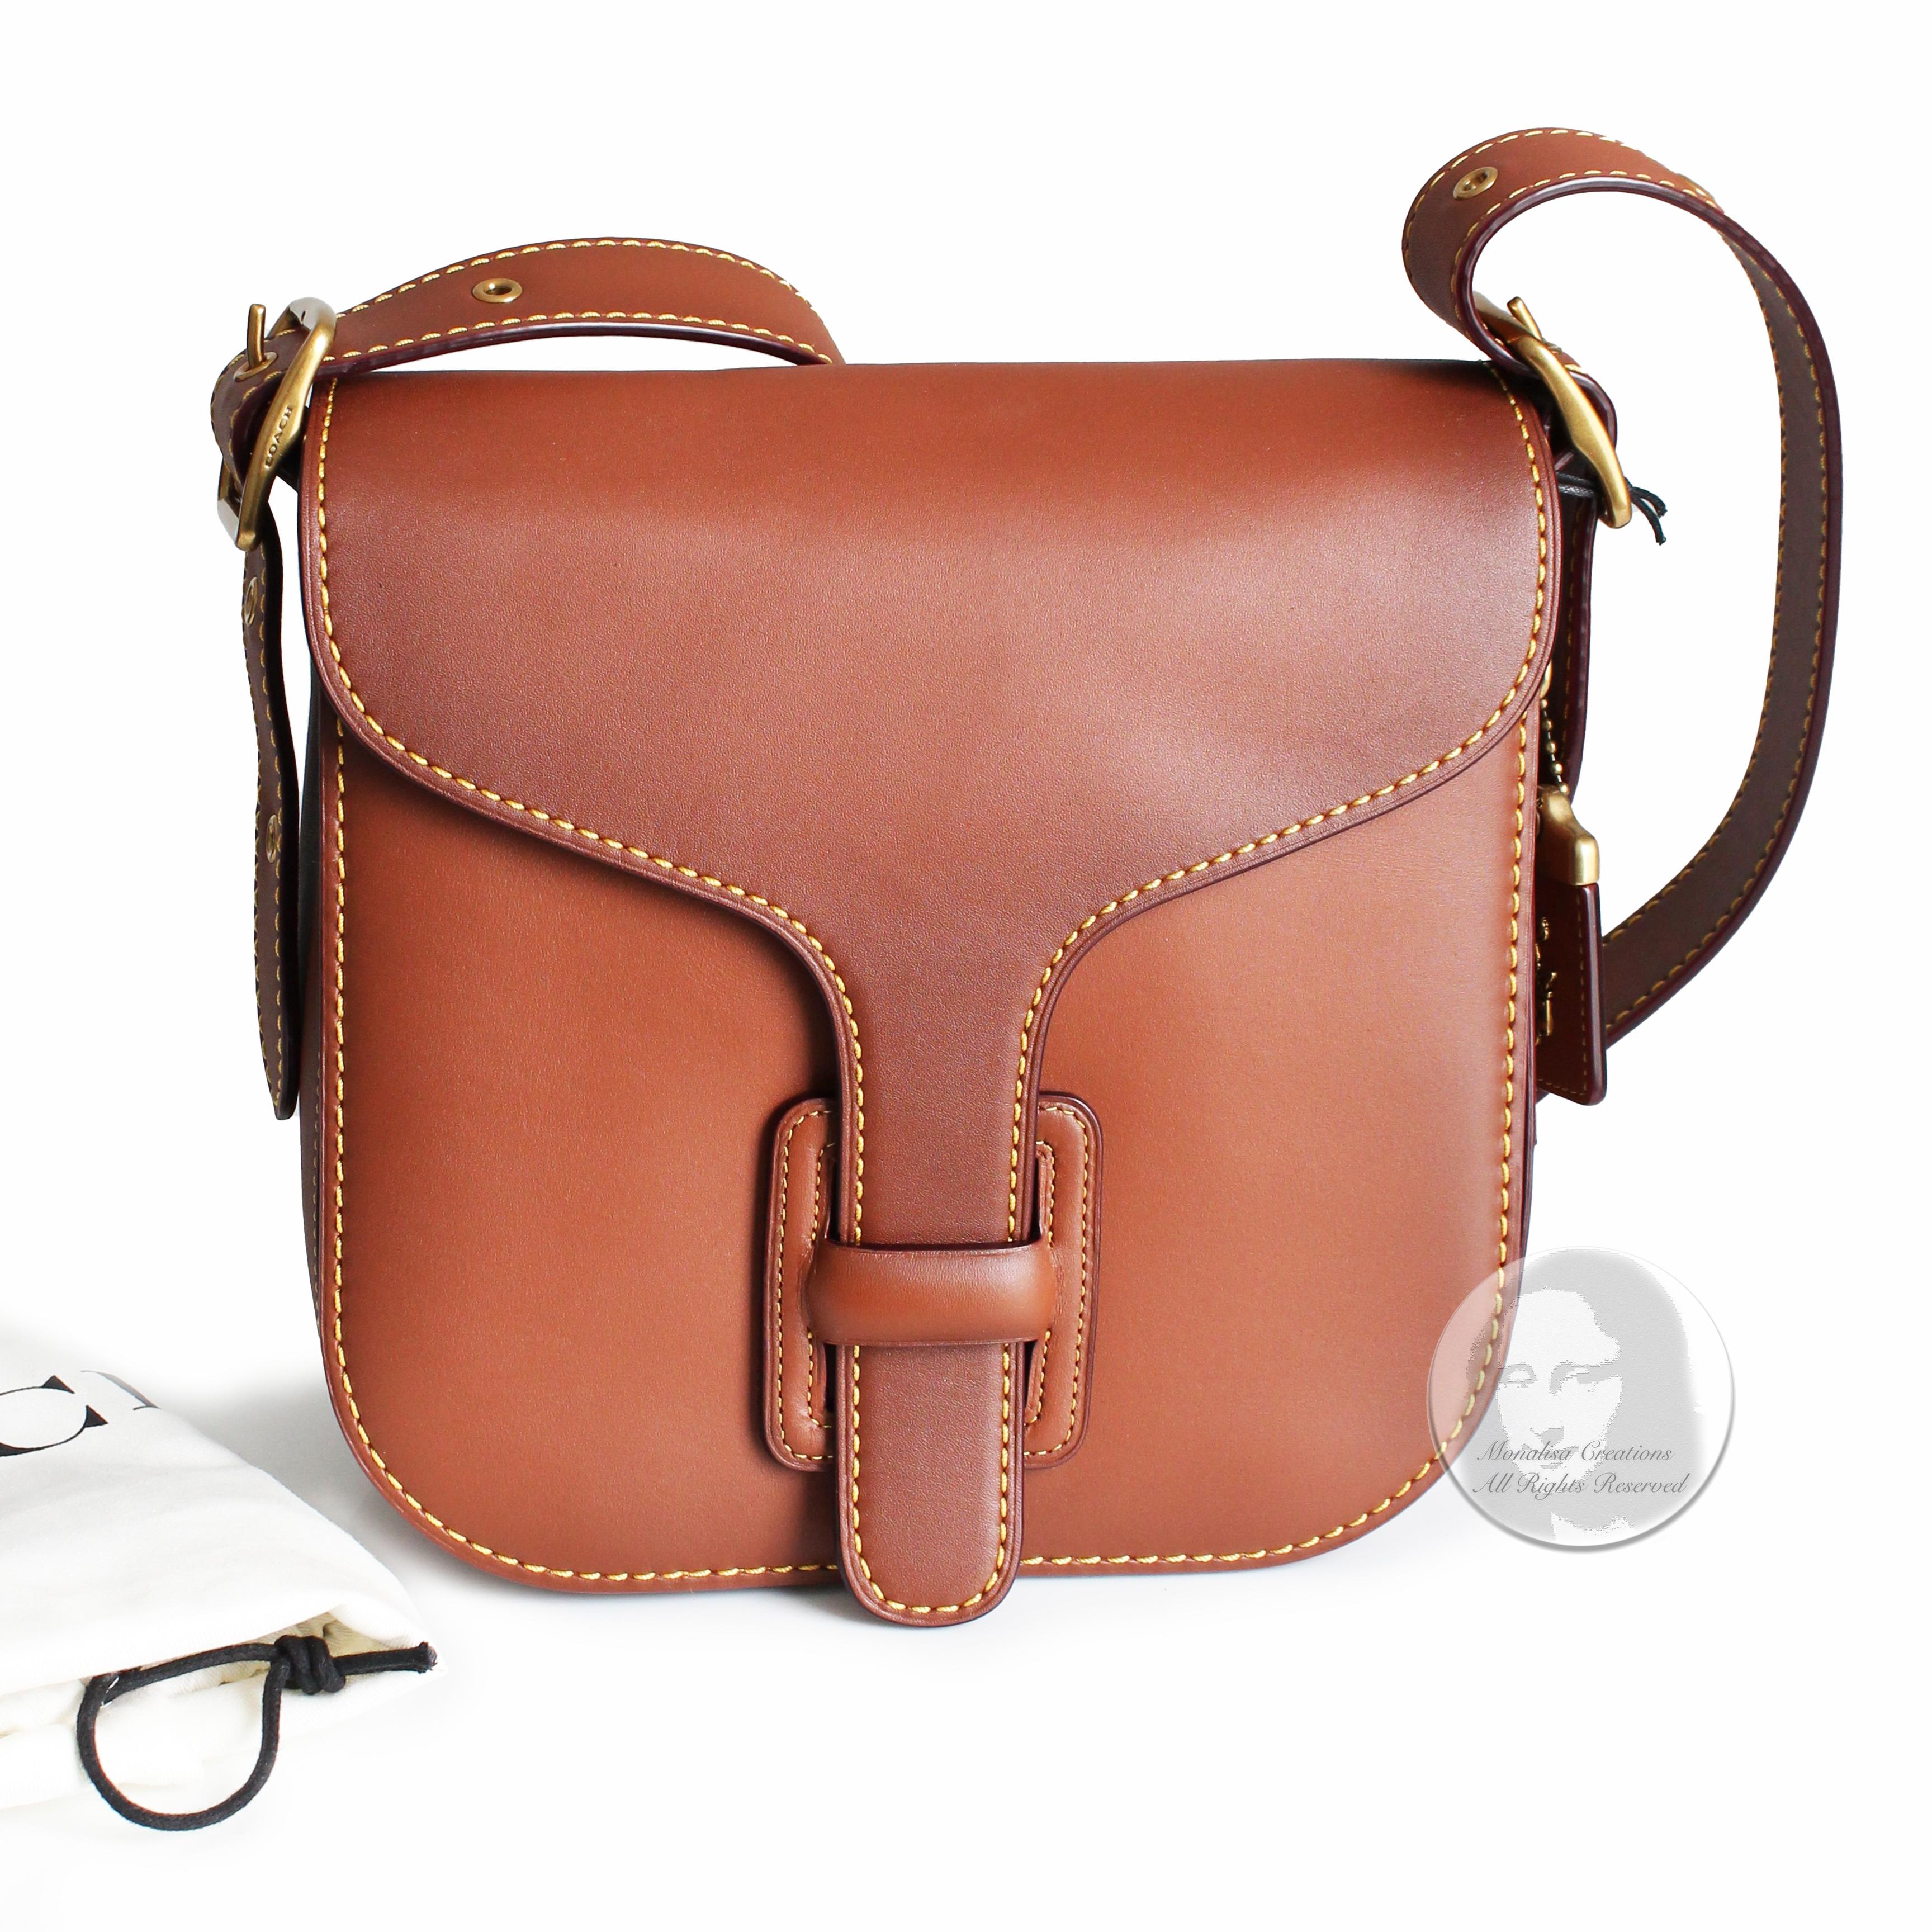 Authentic, NEW in box with tags Coach Archive Courier Bag in saddle leather, style 78805. Sold exclusively on their website as part of their 2019 Coach Originals collection.   

A Bonnie Cashin design with a rich & gorgeous color! A nod to the